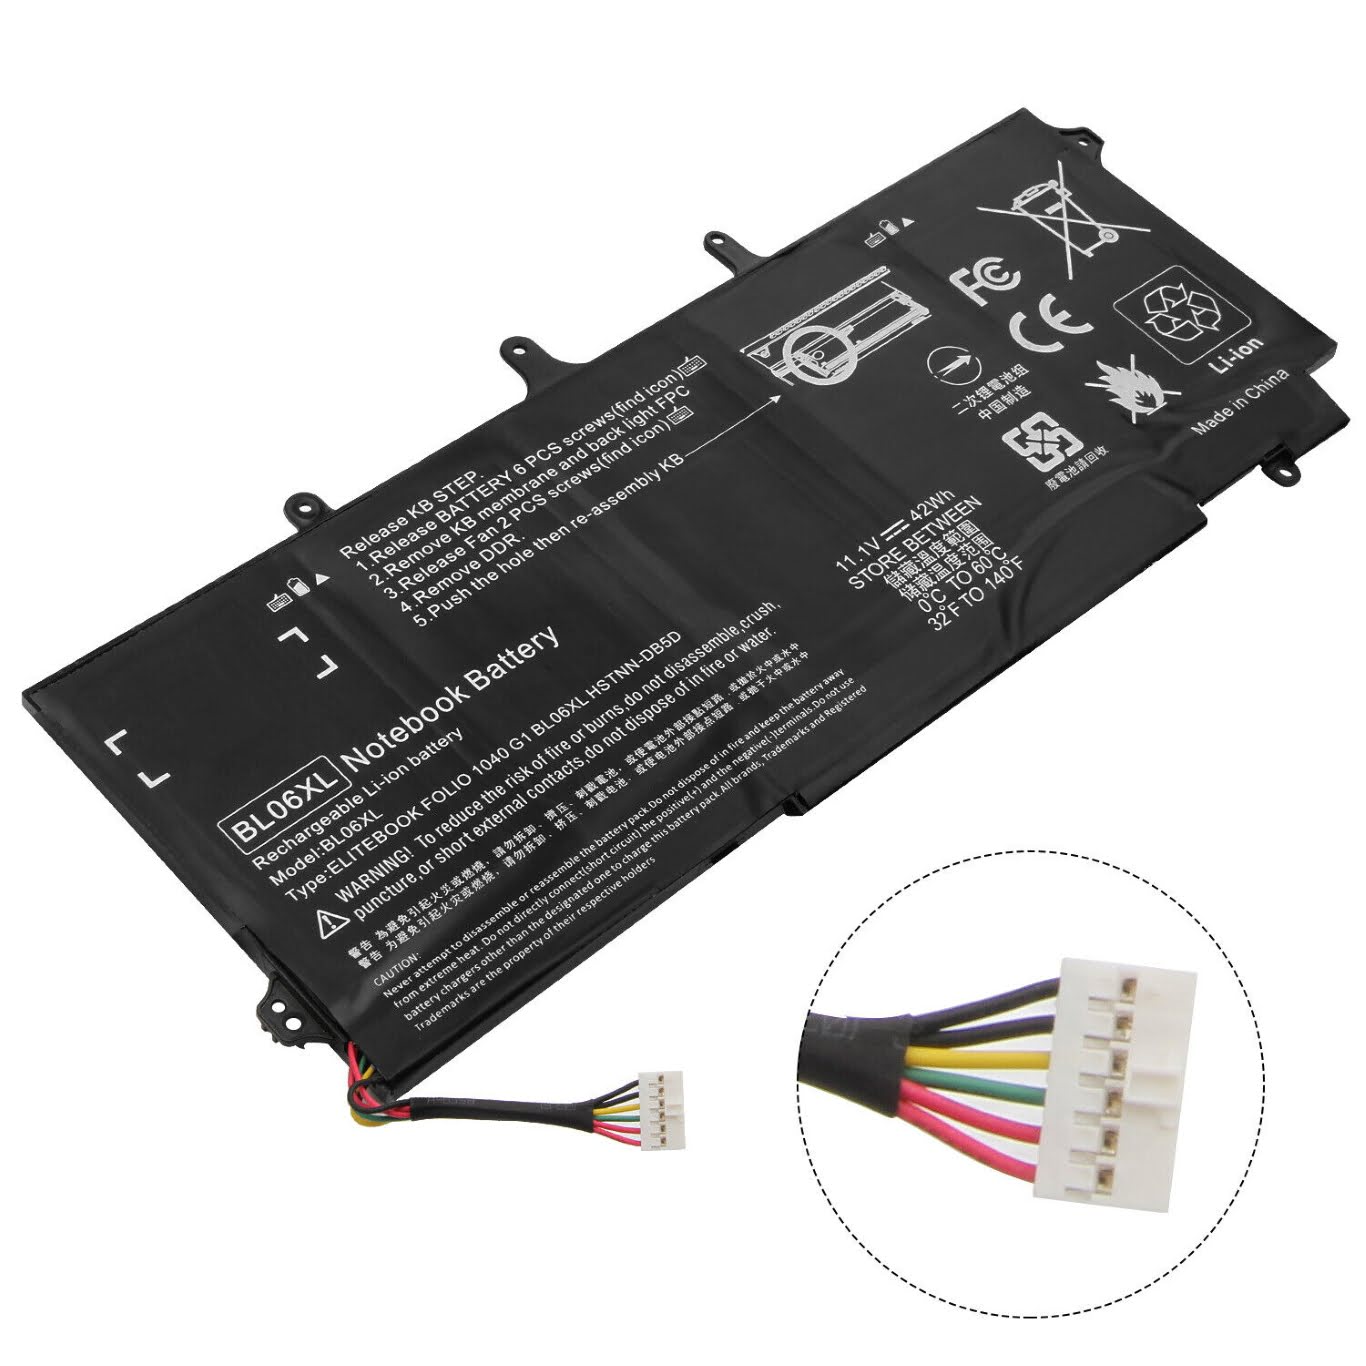 3ICP4/53/86-2, 3ICP4/53/862 replacement Laptop Battery for HP 1040 G1, 1040 G2, 11.1 V, 42wh / 3783mah